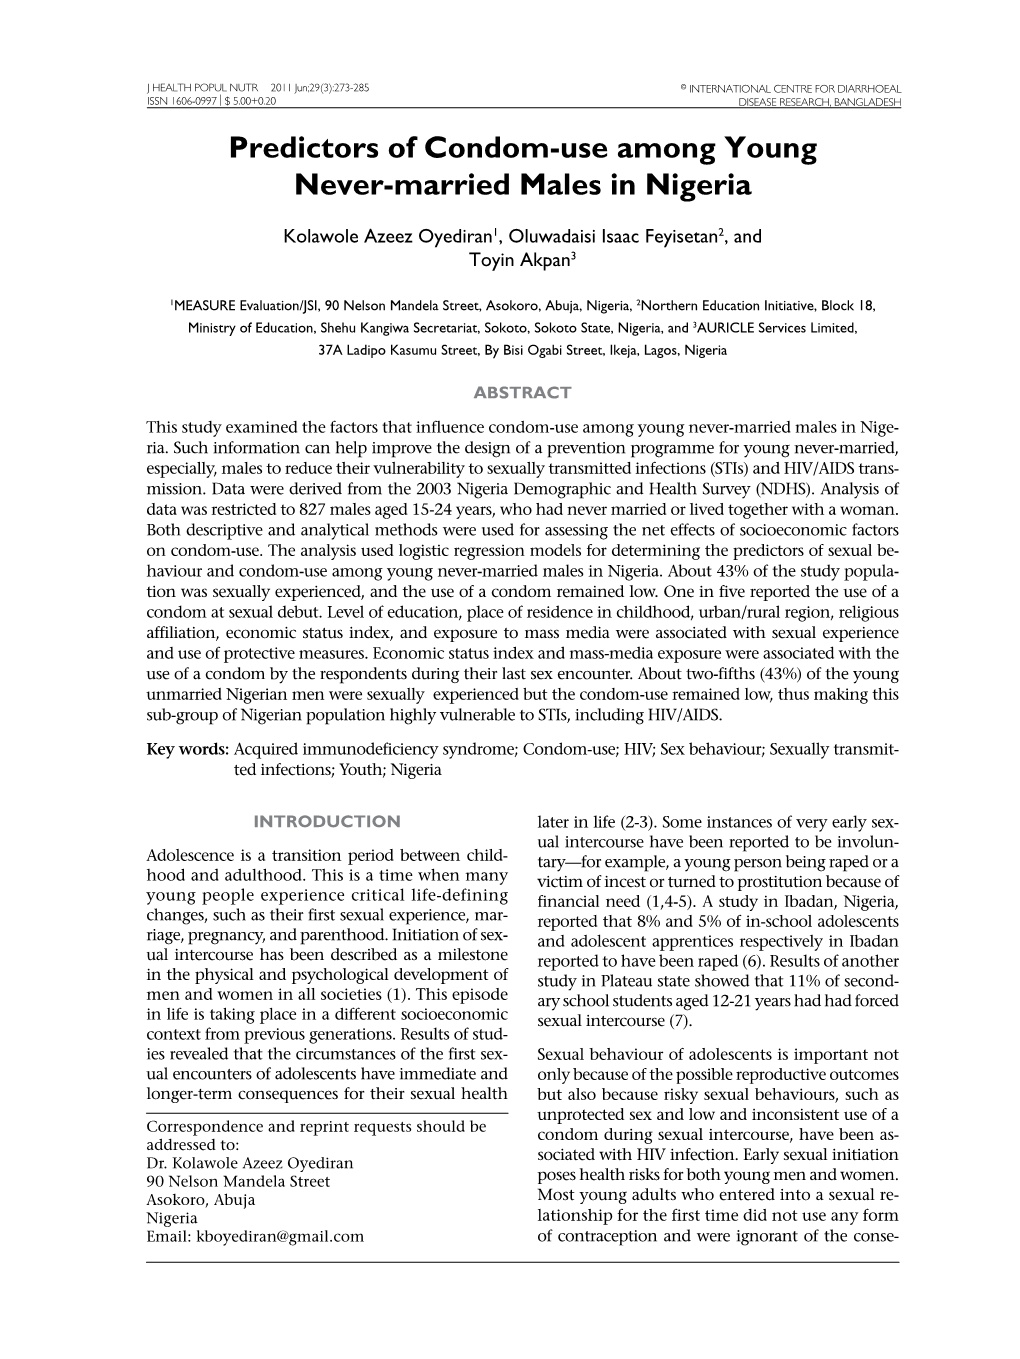 Predictors of Condom-Use Among Young Never-Married Males in Nigeria